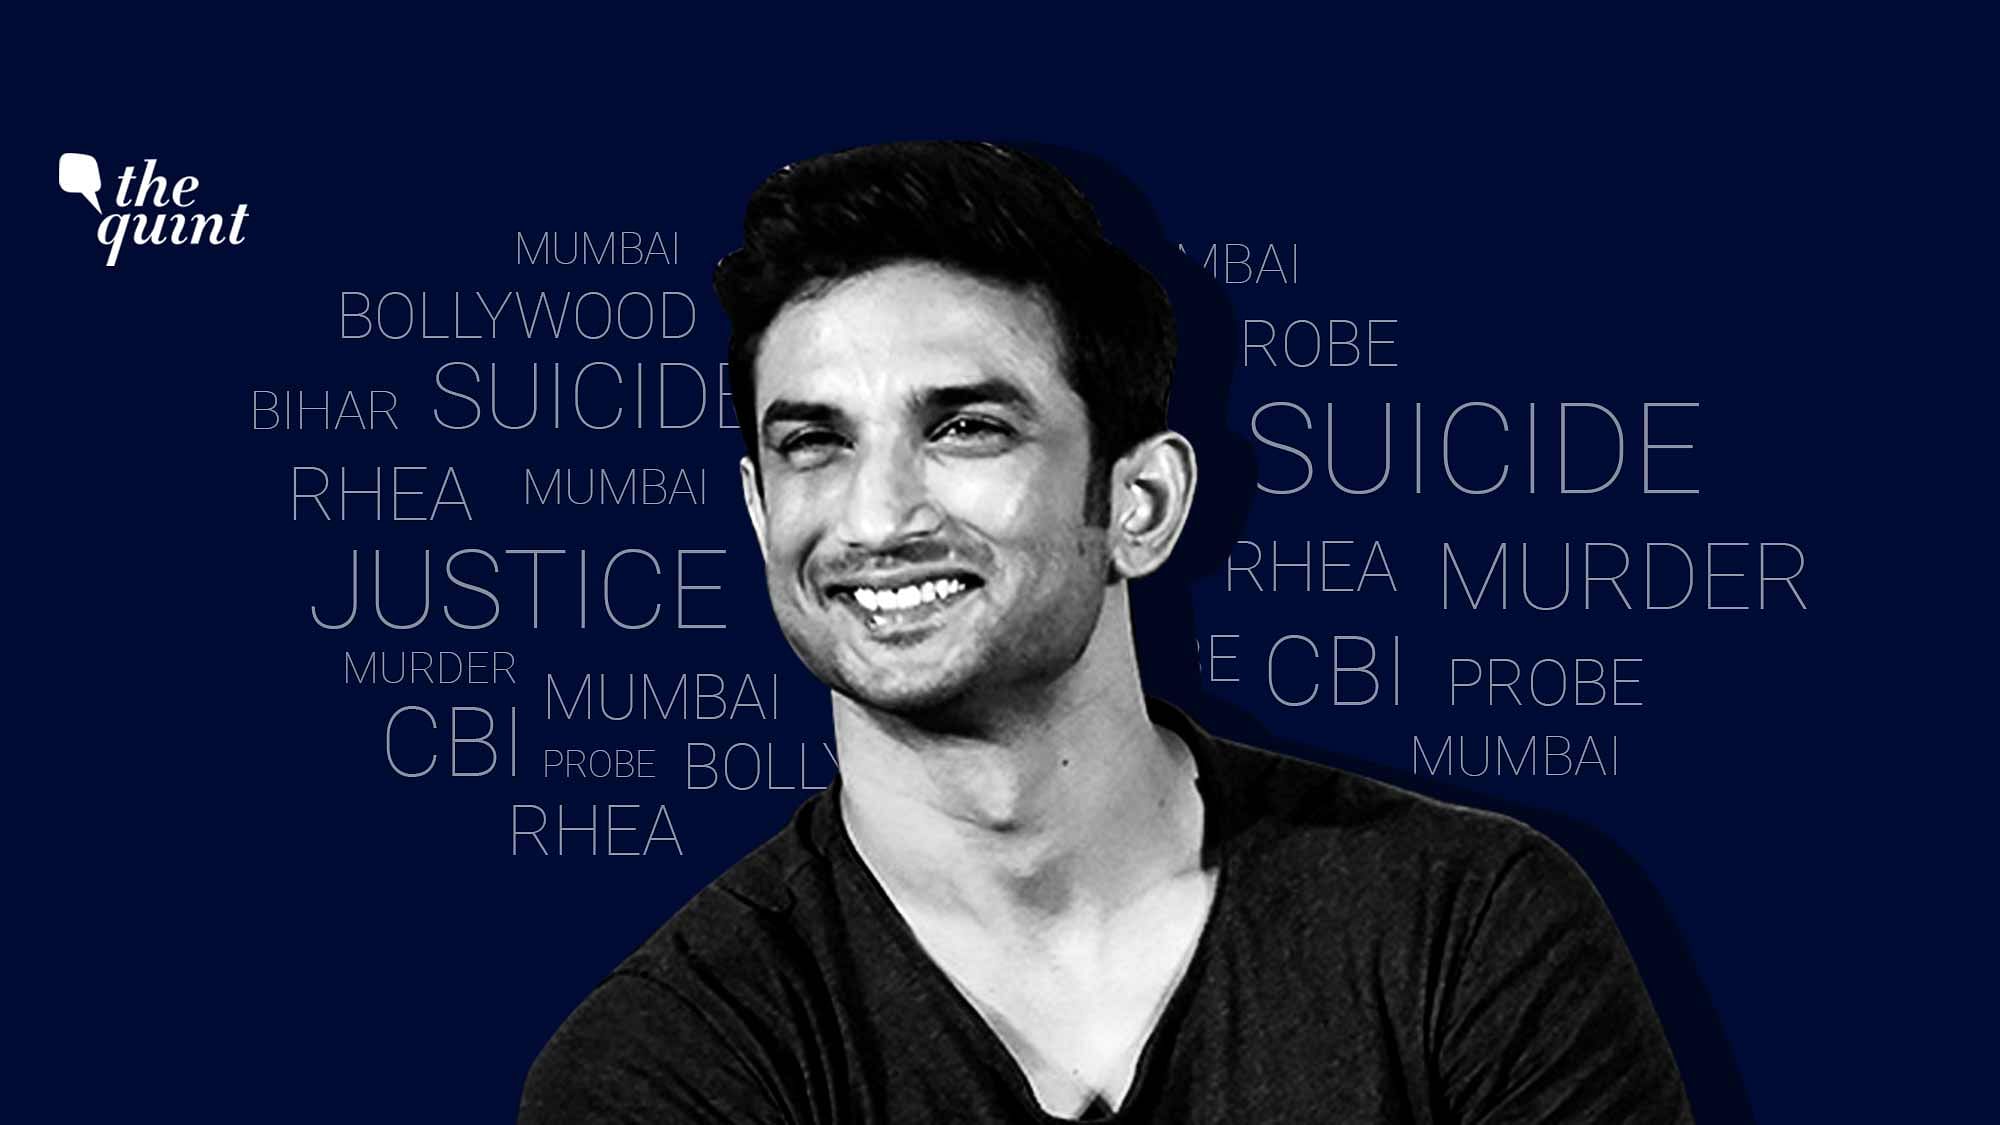 A look at how social media trends and hashtags changed the trajectory of the Sushant Singh Rajput case.